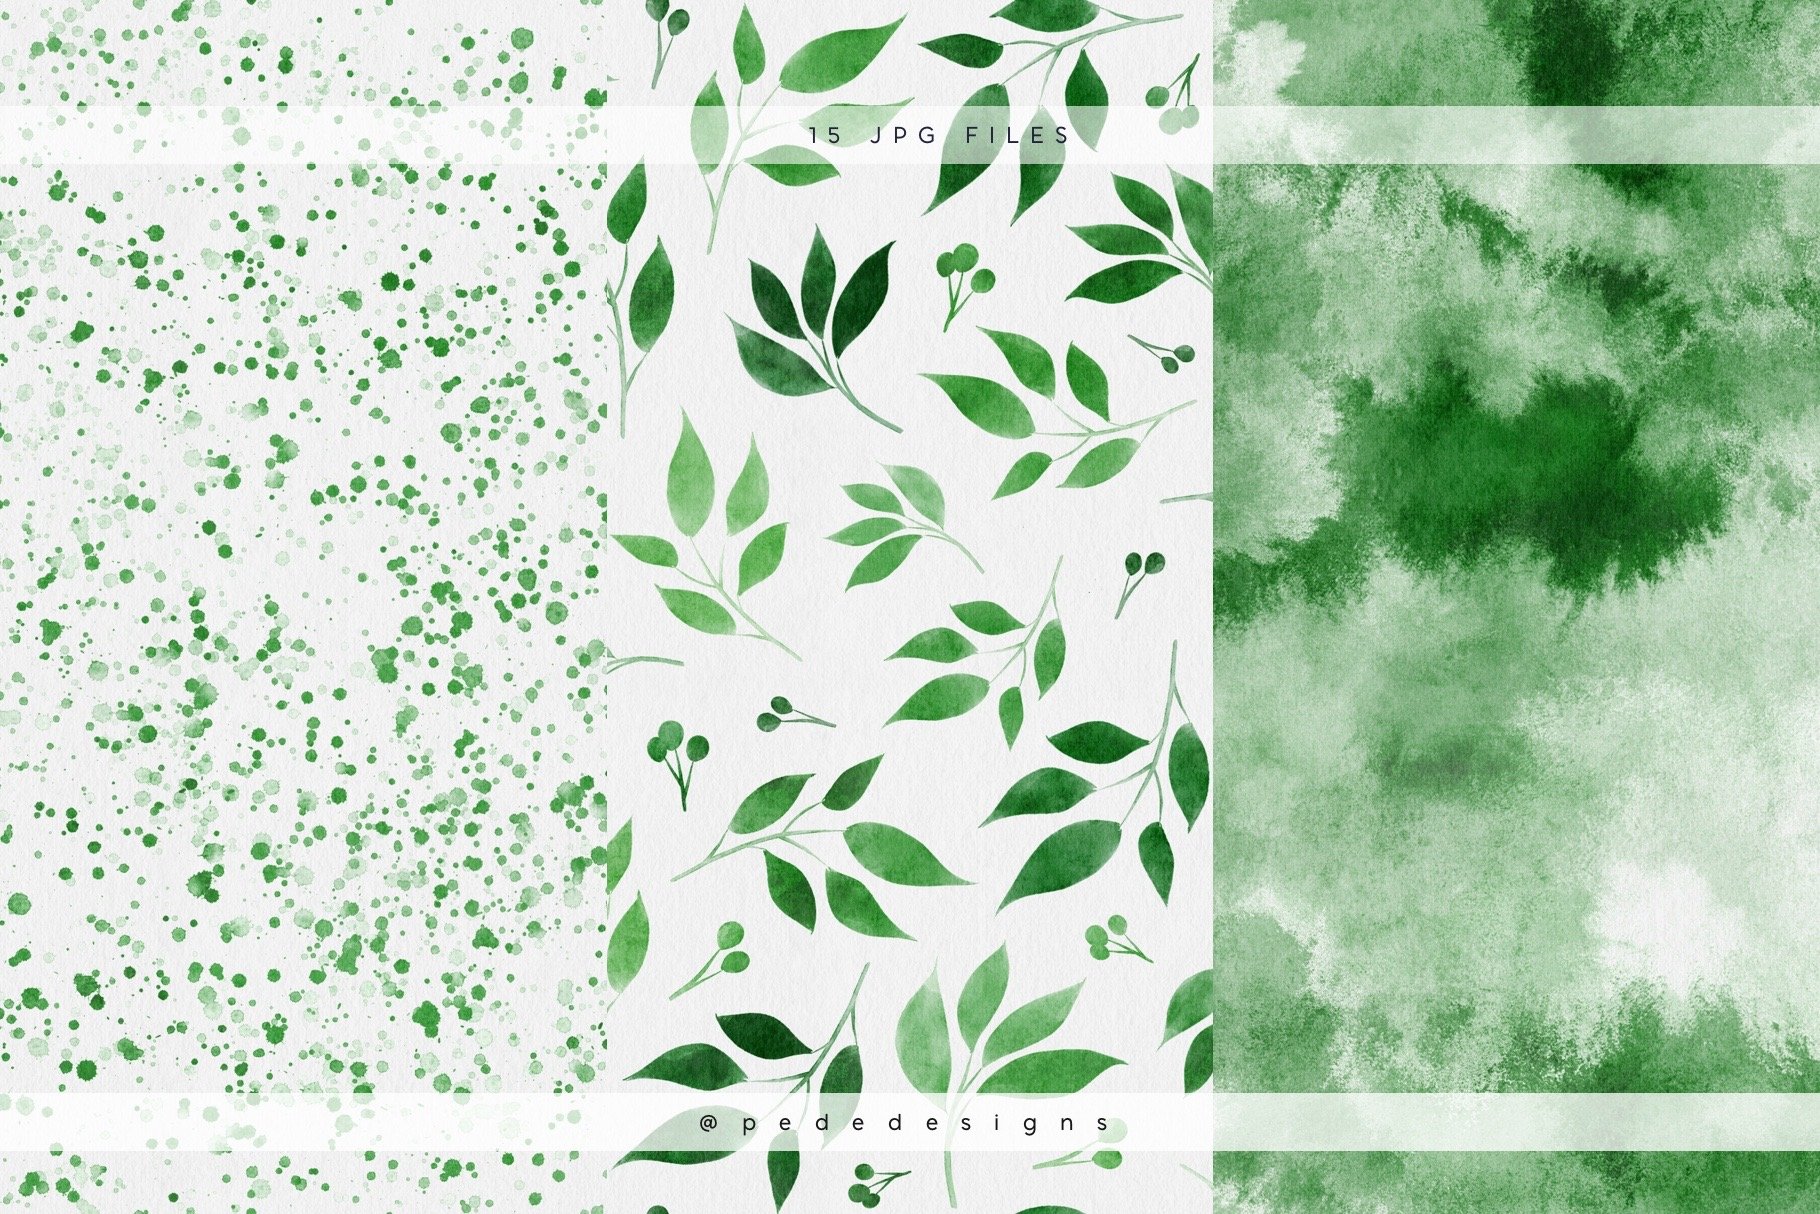 Flowers, dotted and gradient green watercolor backgrounds.